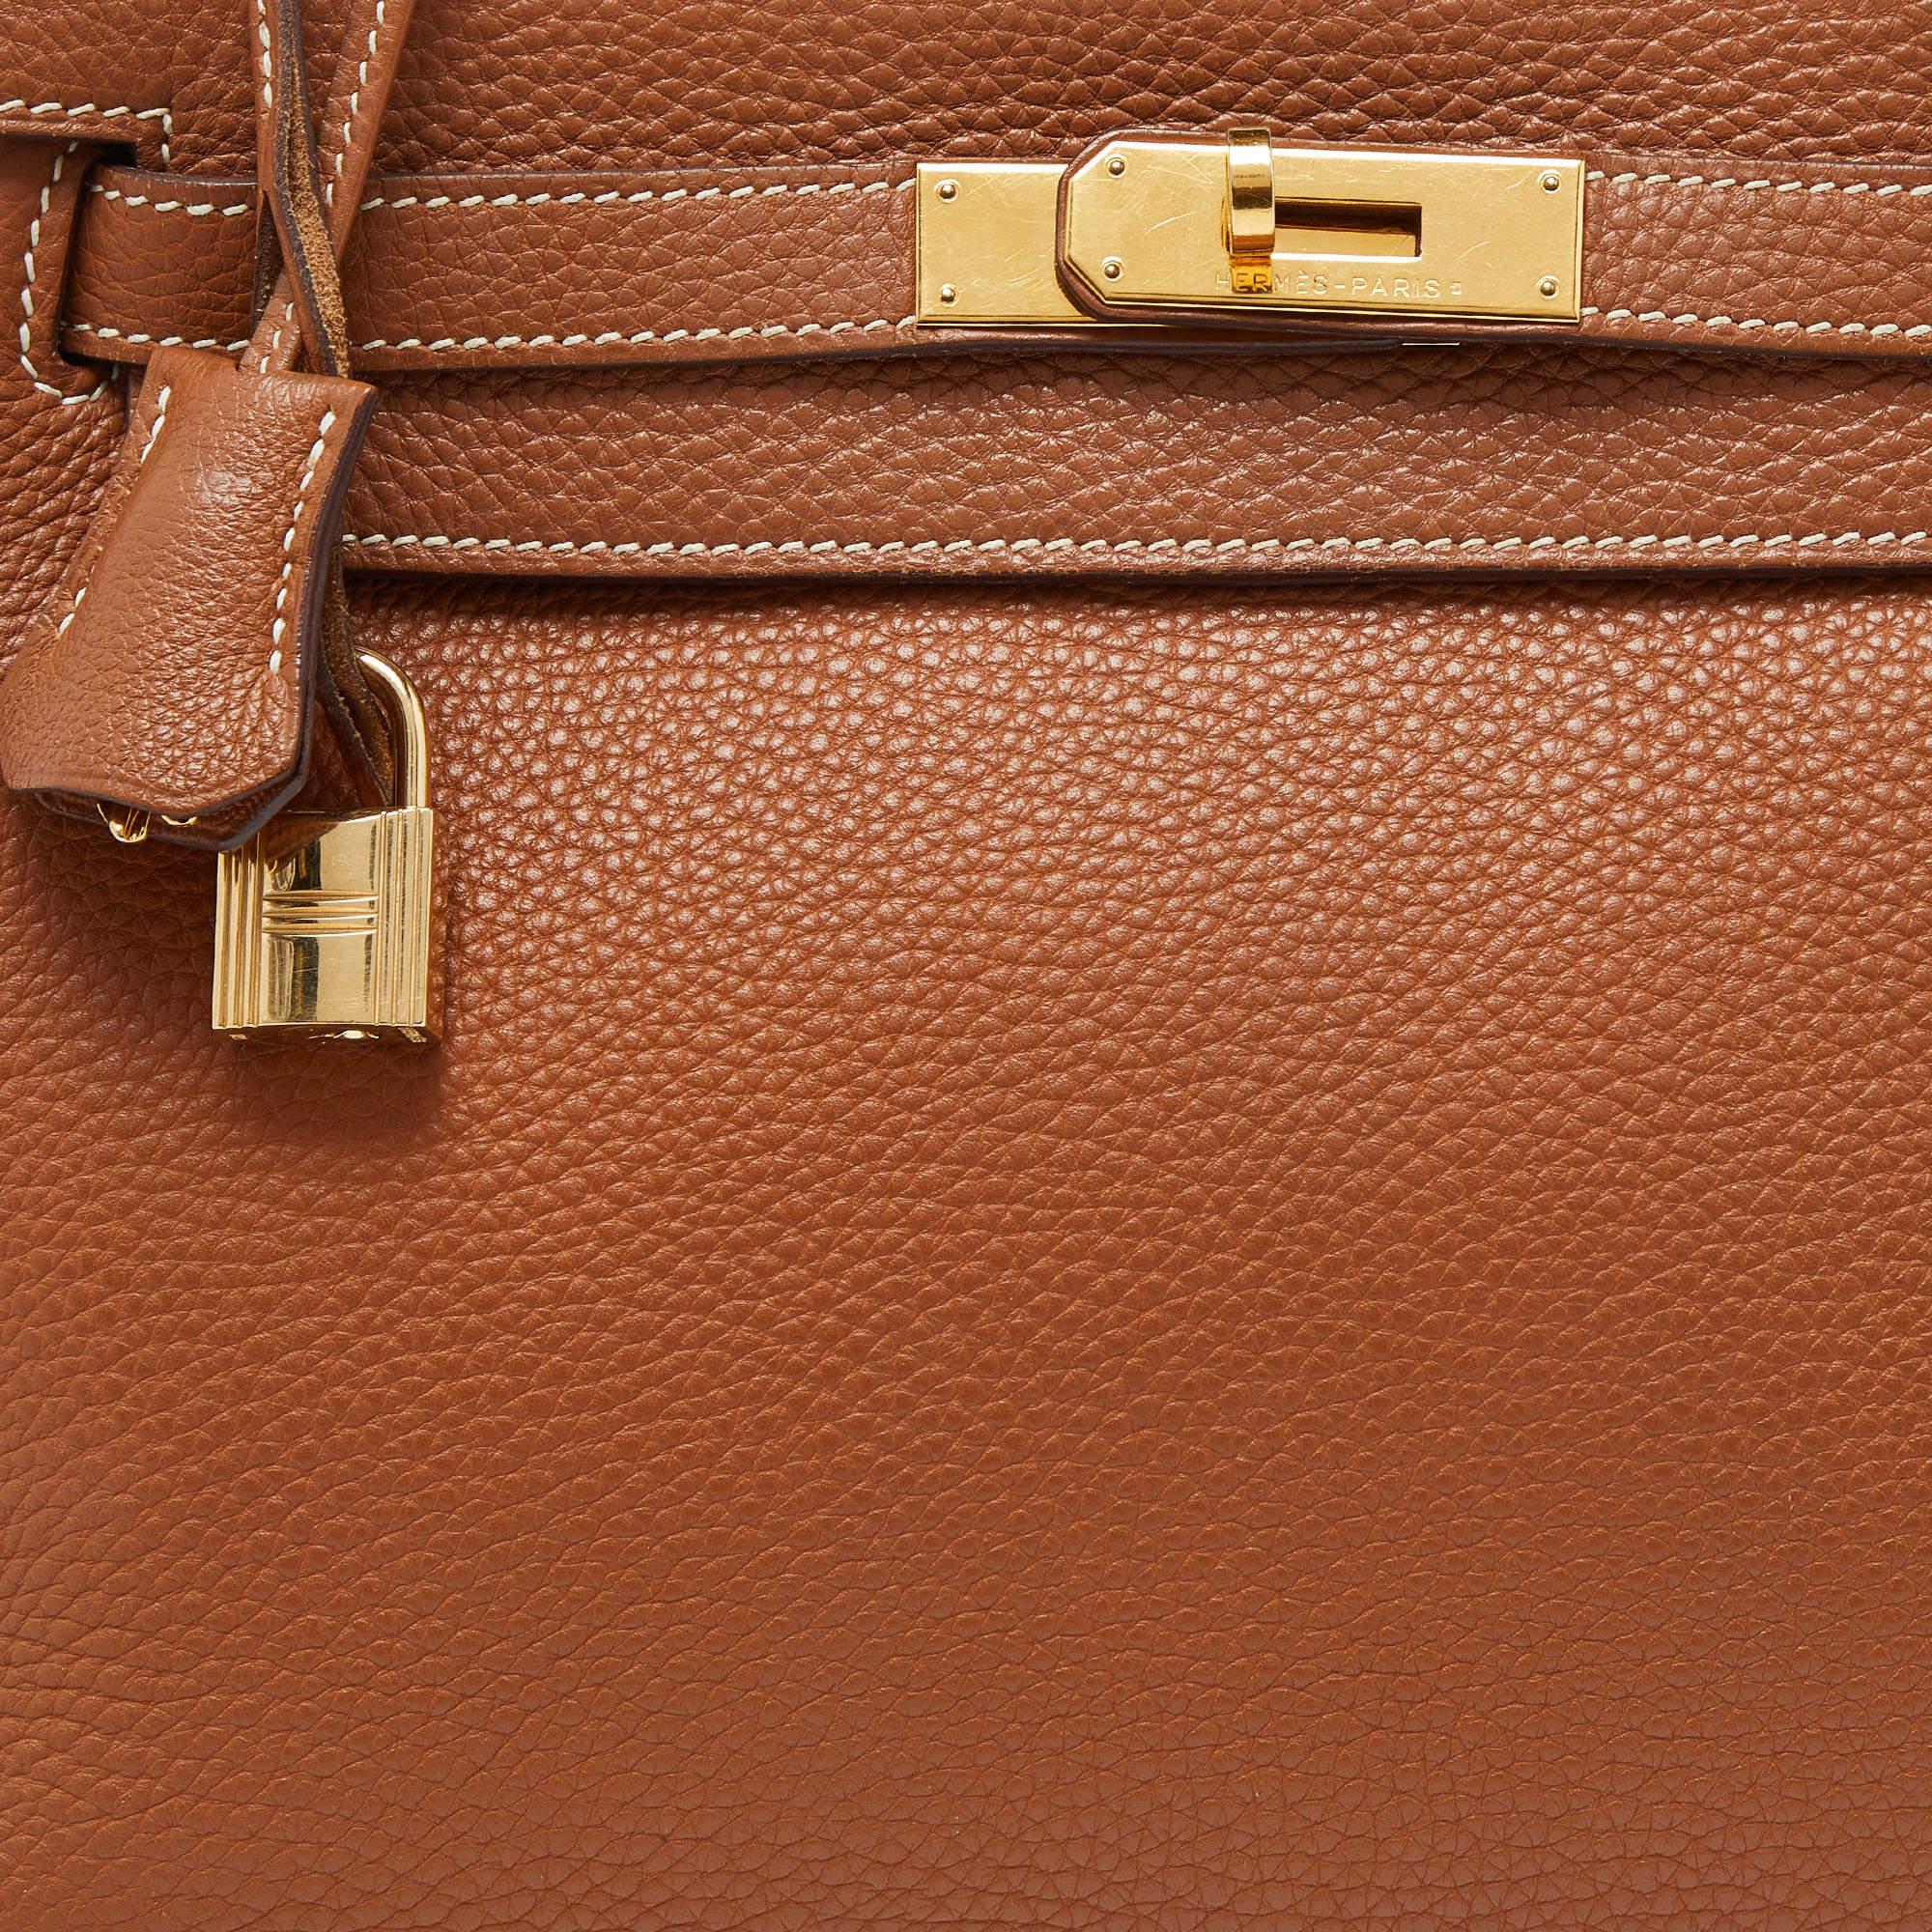 Hermes Gold Taurillion Clemence Leather Gold Finish Kelly Retourne 28 Bag In Good Condition For Sale In Dubai, Al Qouz 2